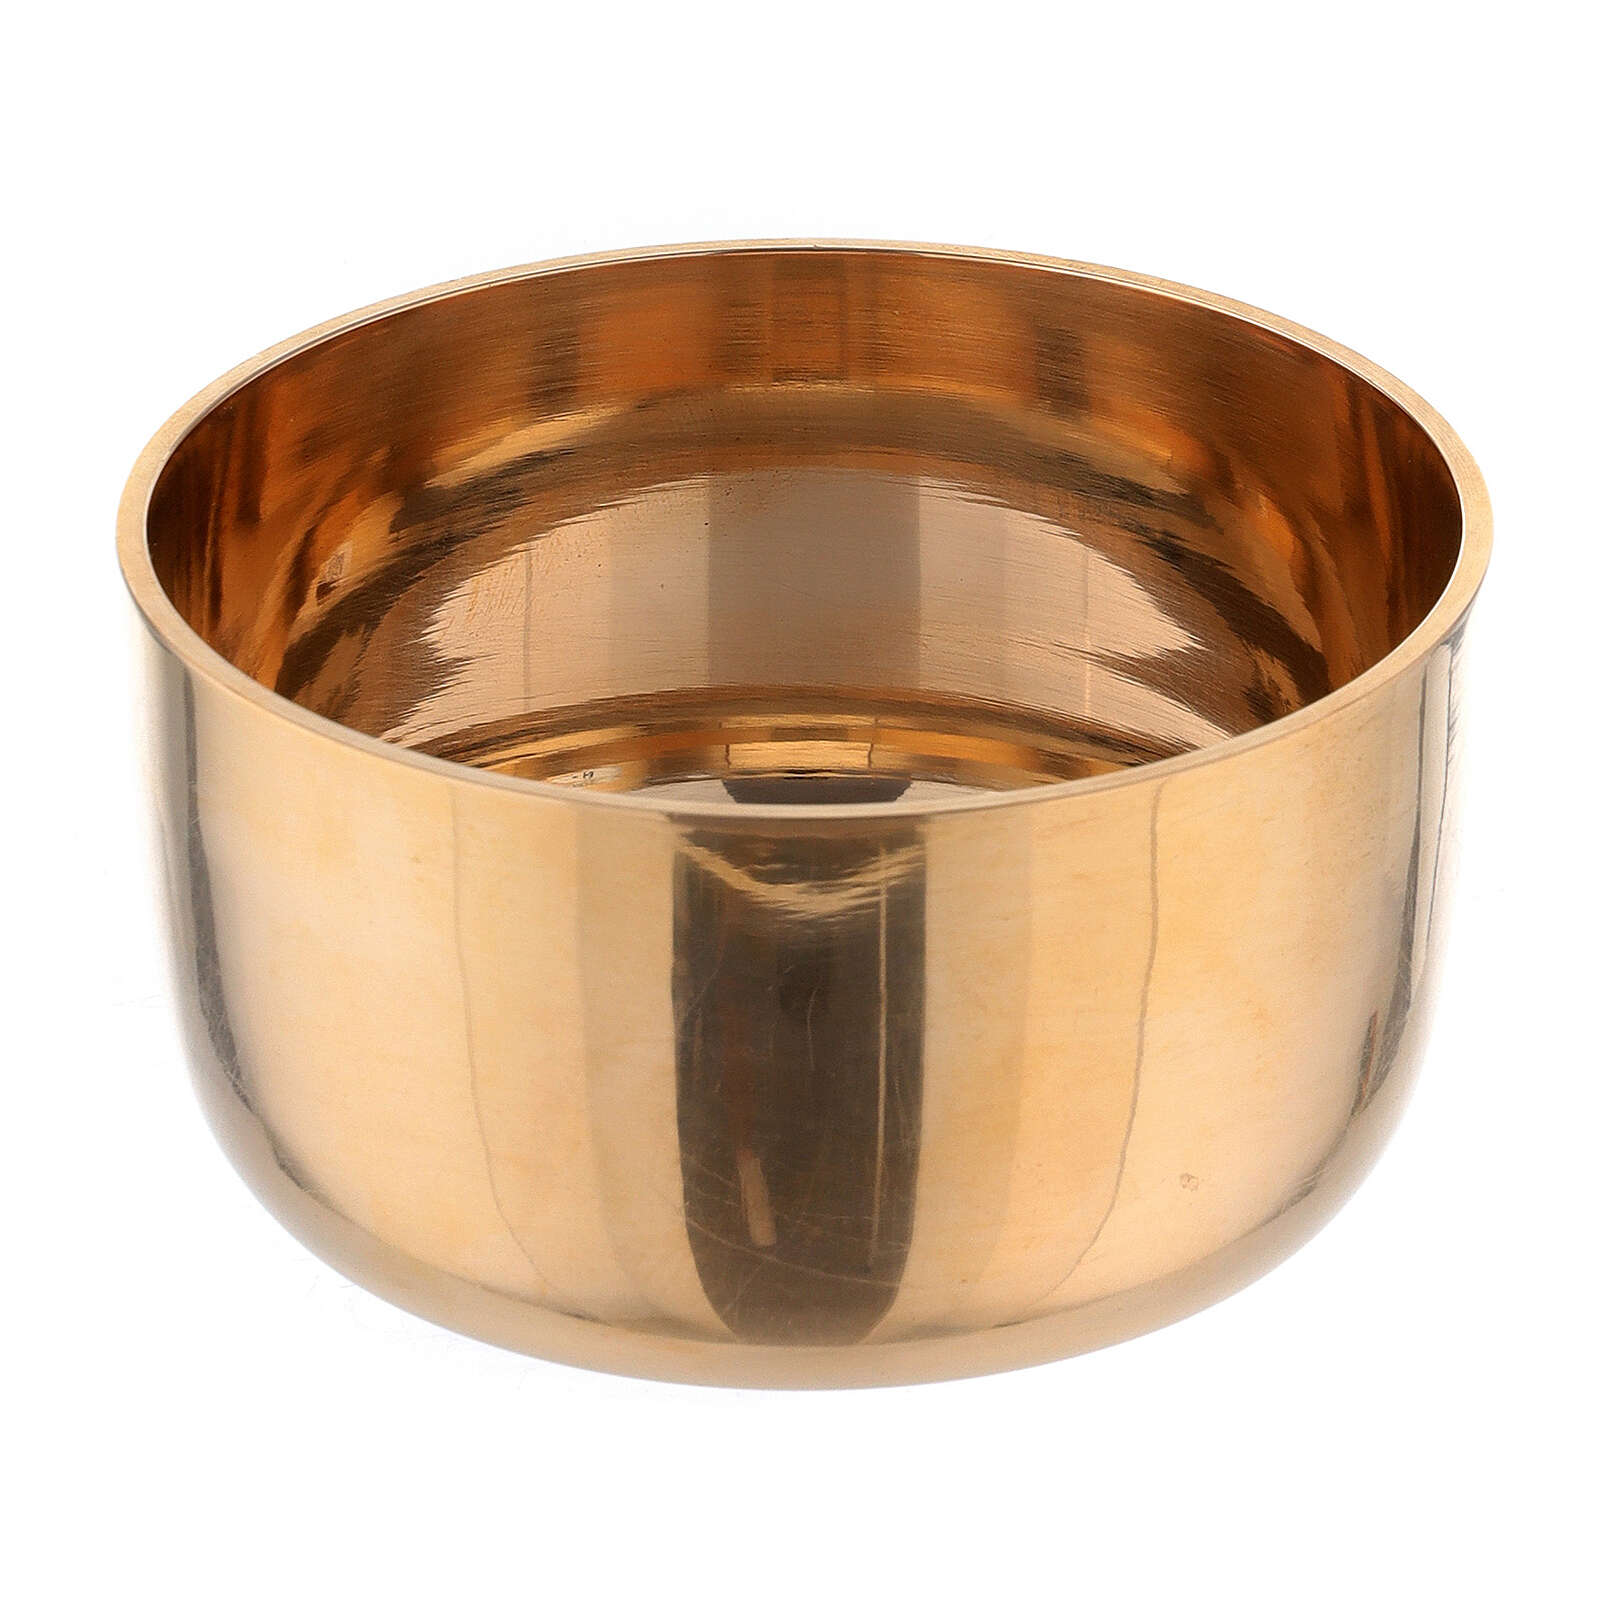 Candle follower 6 cm in glossy golden brass | online sales on HOLYART.co.uk